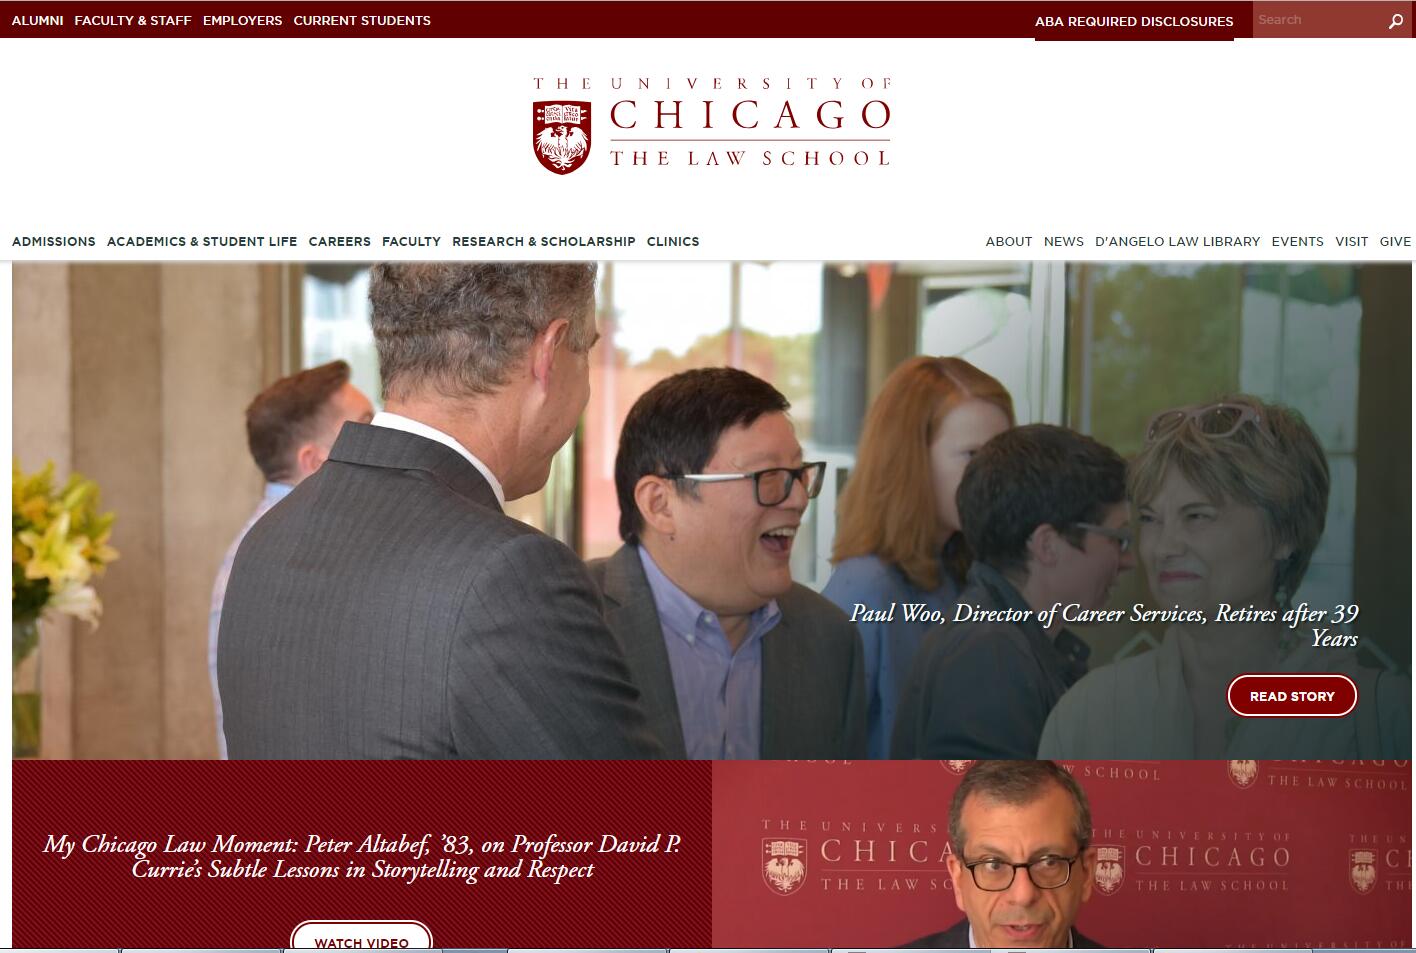 The Law School at University of Chicago